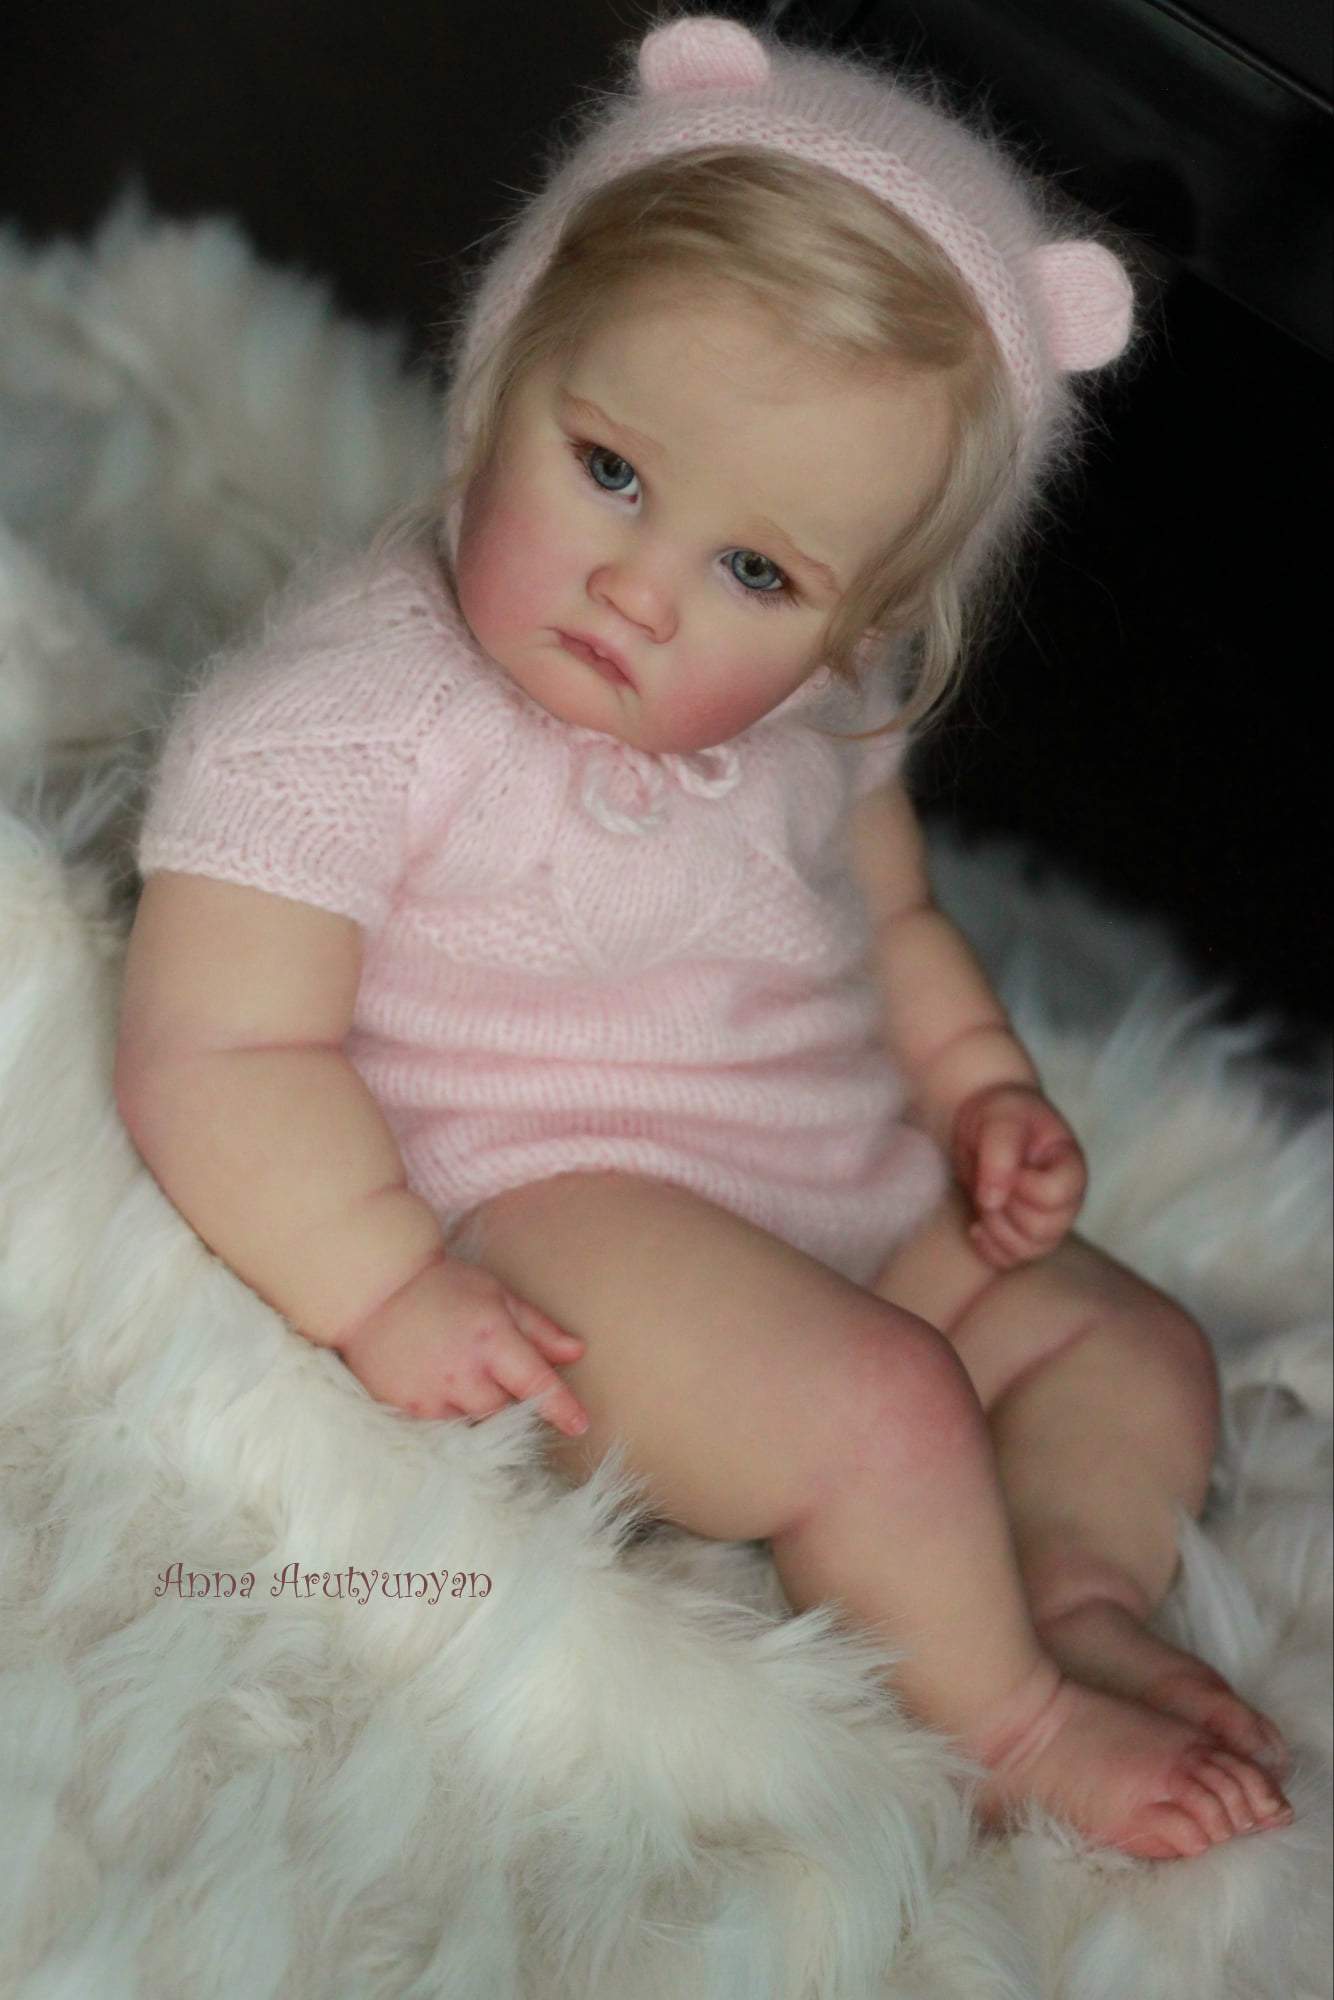 Charlotte 11 Months by Laura Lee Eagles - Create A Little Magic (Pty) Ltd